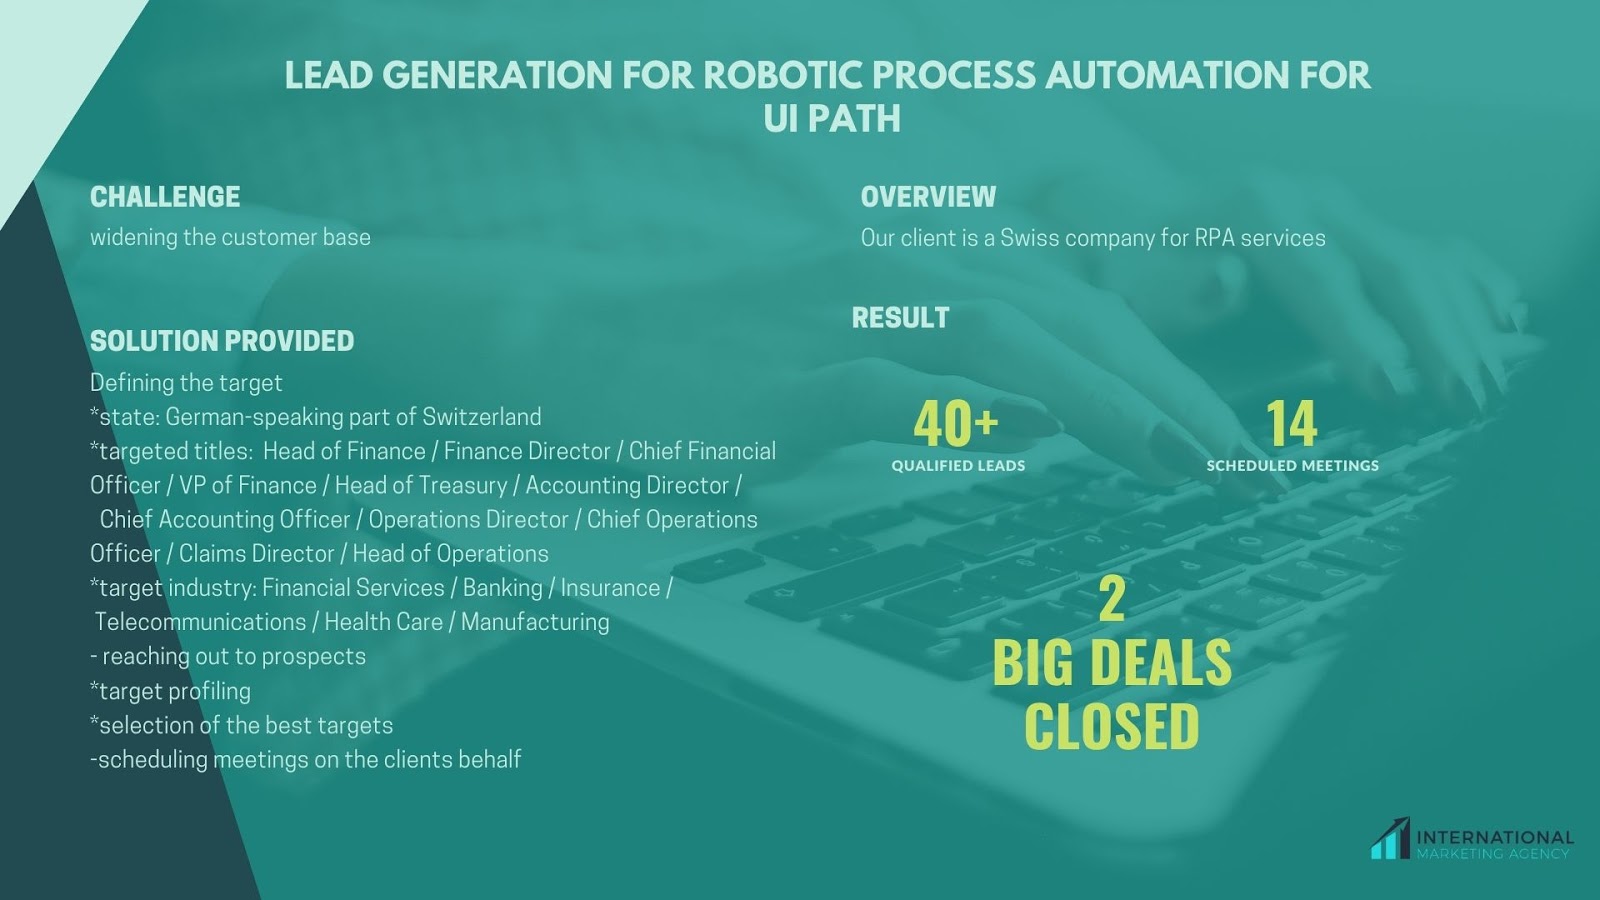 Lead generation for Robotic Process Automation for UiPath